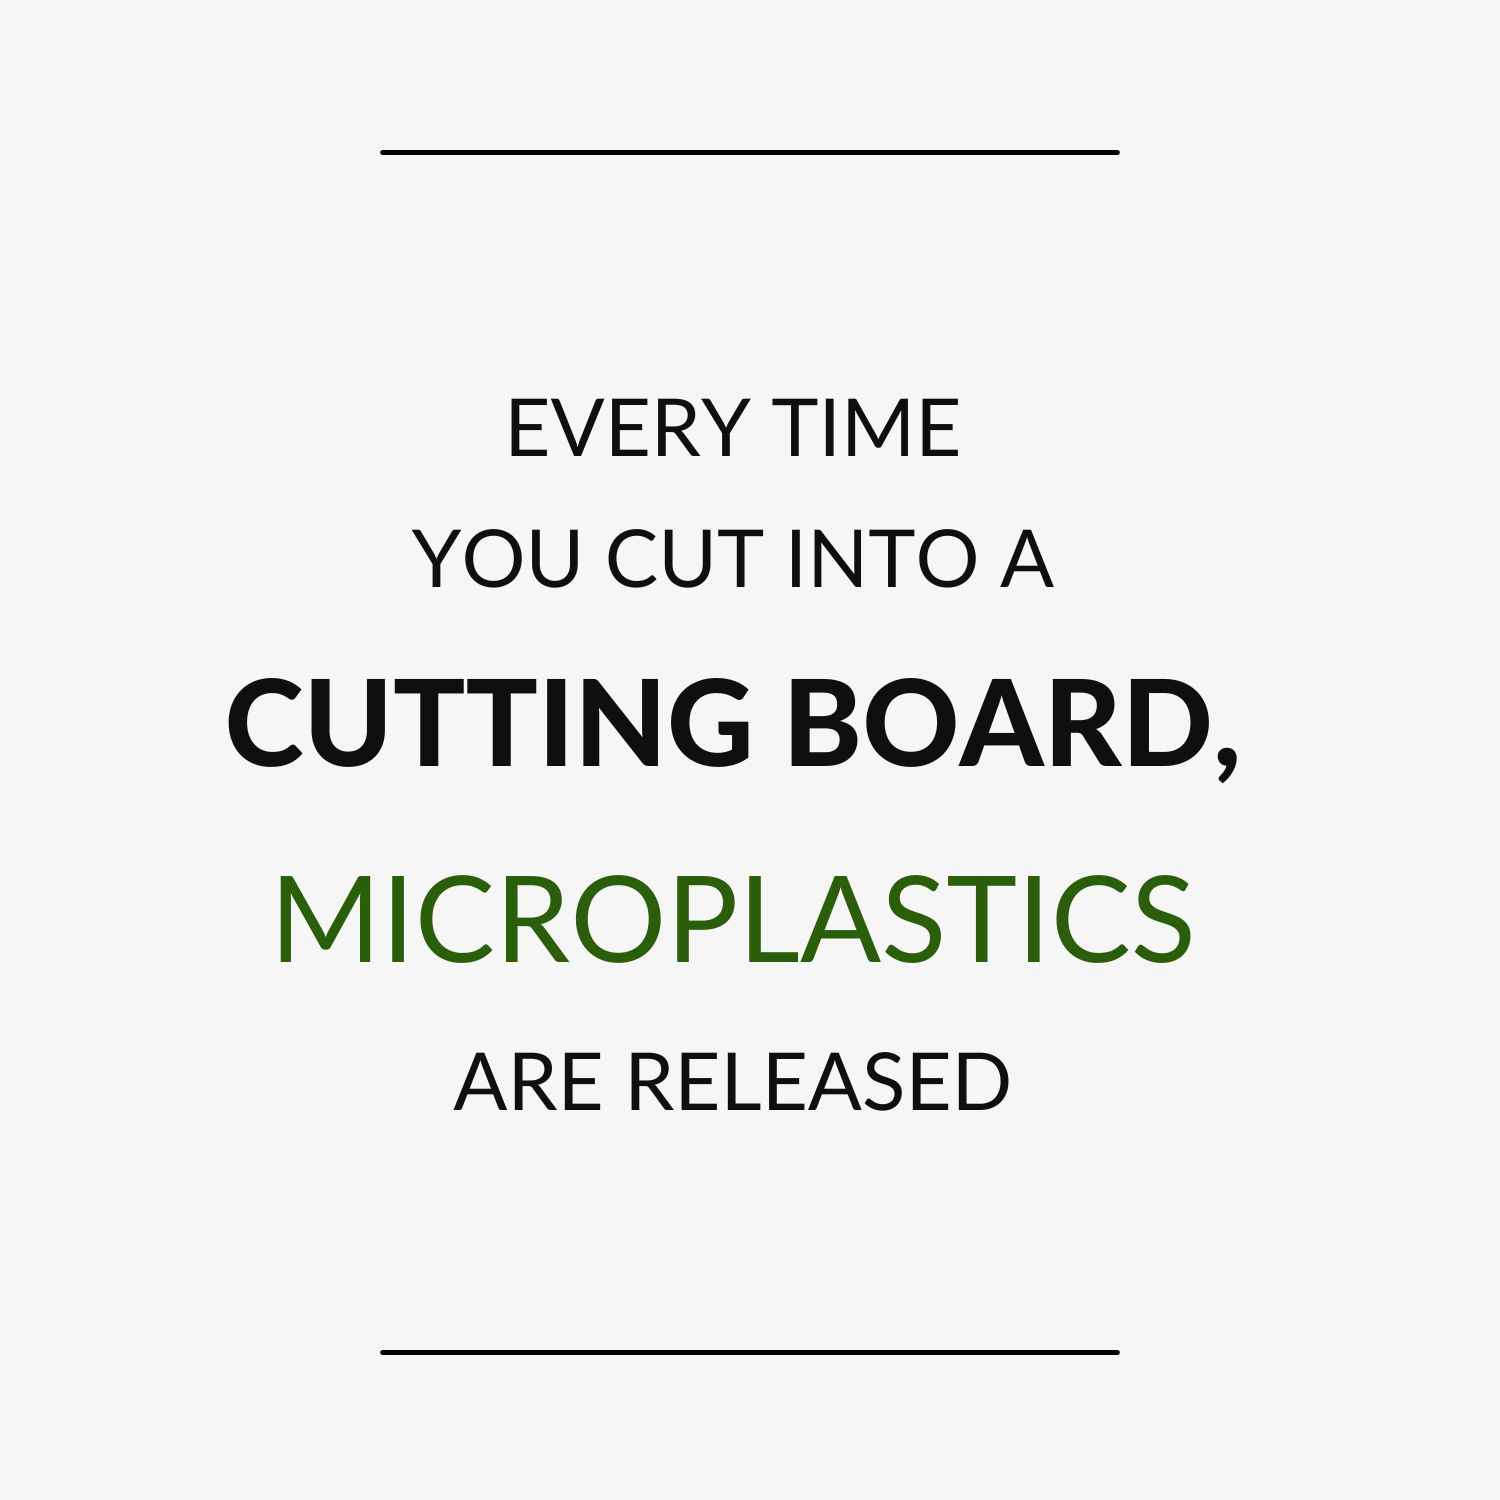 https://darinolien.com/wp-content/uploads/2022/12/Website-Fact-Every-time-you-cut-into-a-cutting-boards-microplastics-are-released-.jpg